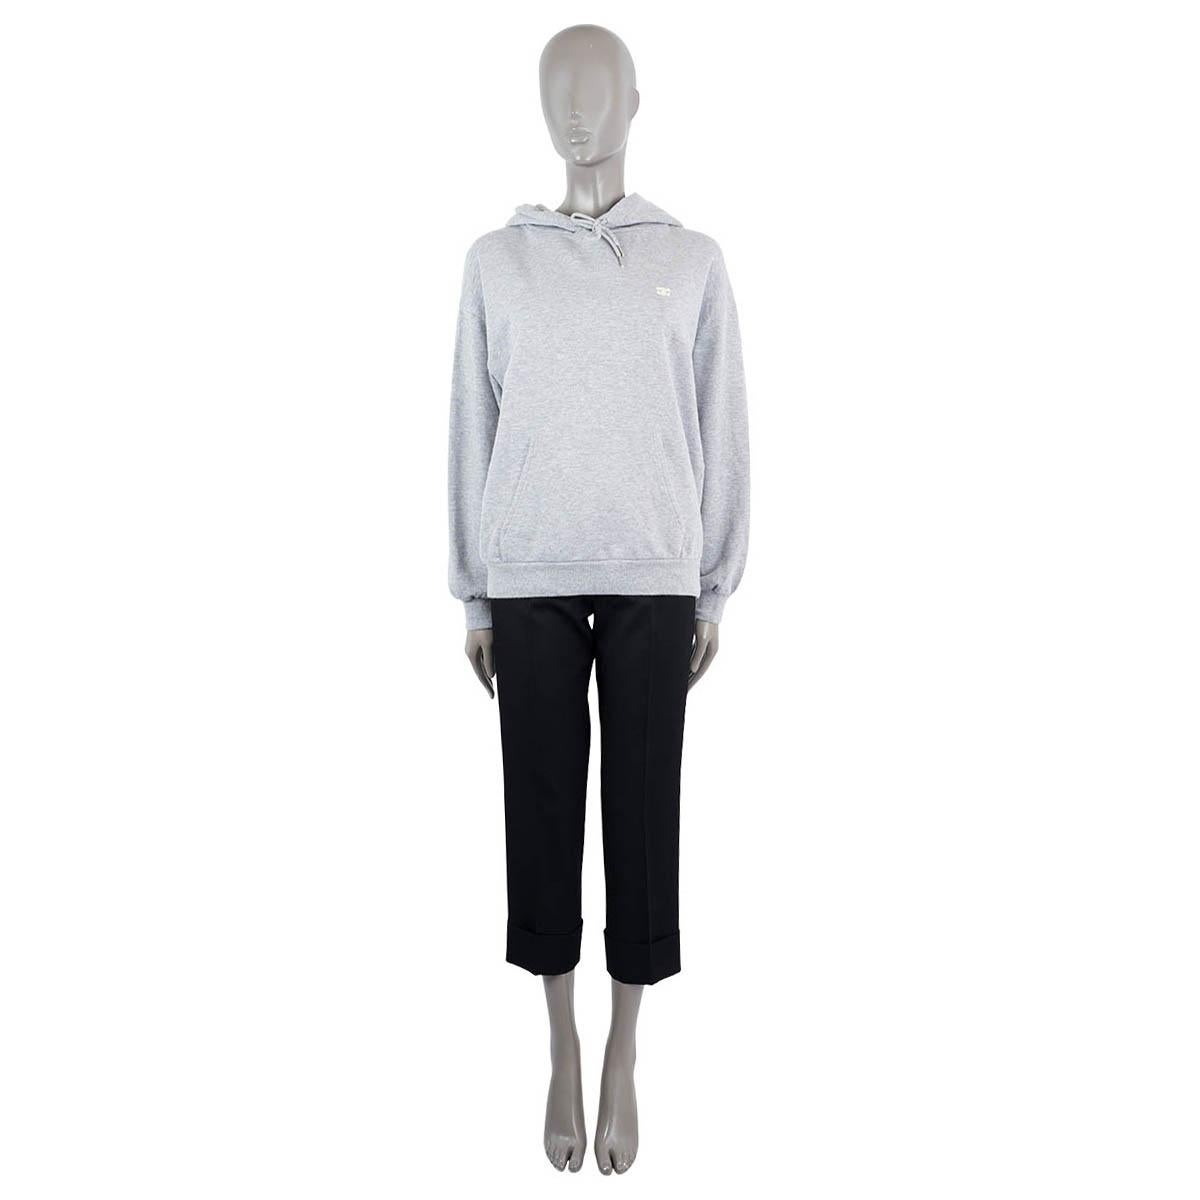 100% authentic Celine hoodie sweater in grey cotton (86%) and cashmere (14%). Features Triomphe logo embroidery on the front and a drawstring neck. Has been worn and is in excellent condition.

Measurements
Model	2Y377450I
Shoulder Width	59cm